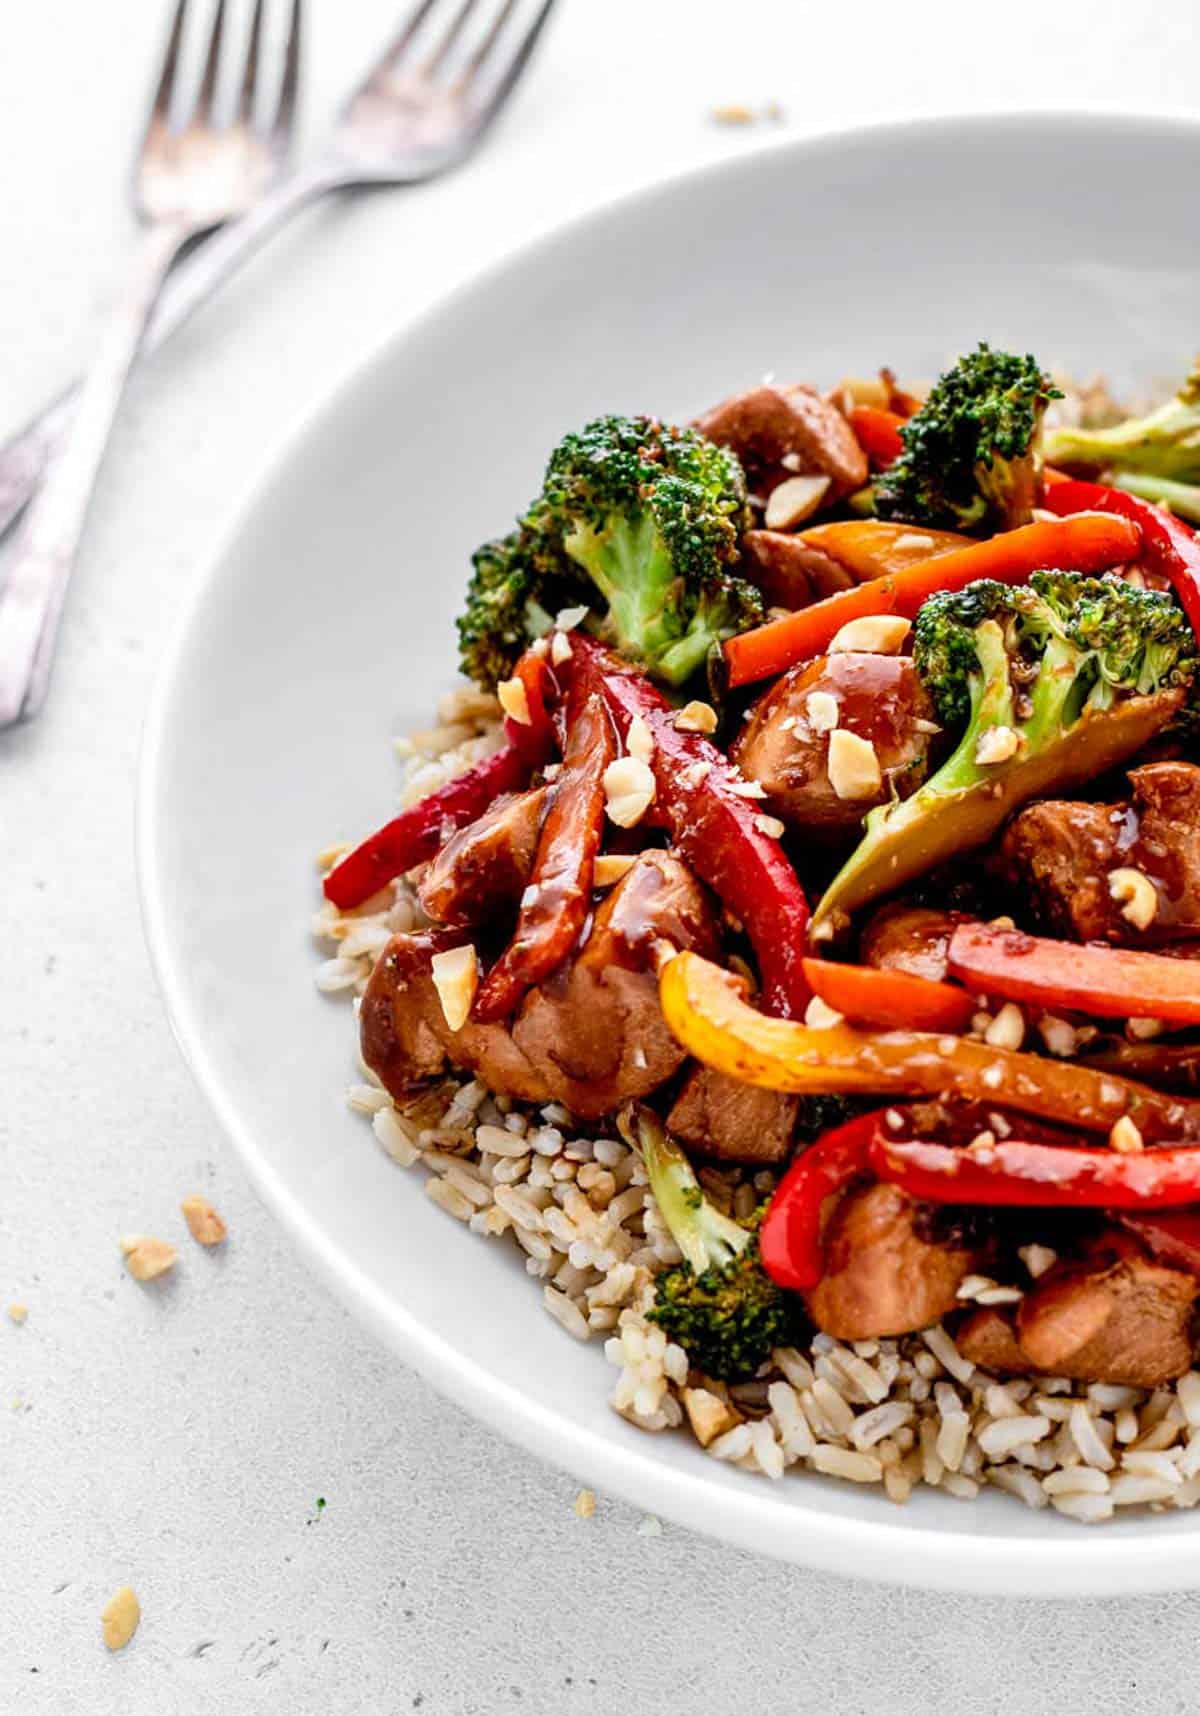 Healthy chicken stir fry served over rice with a garnish of peanuts.